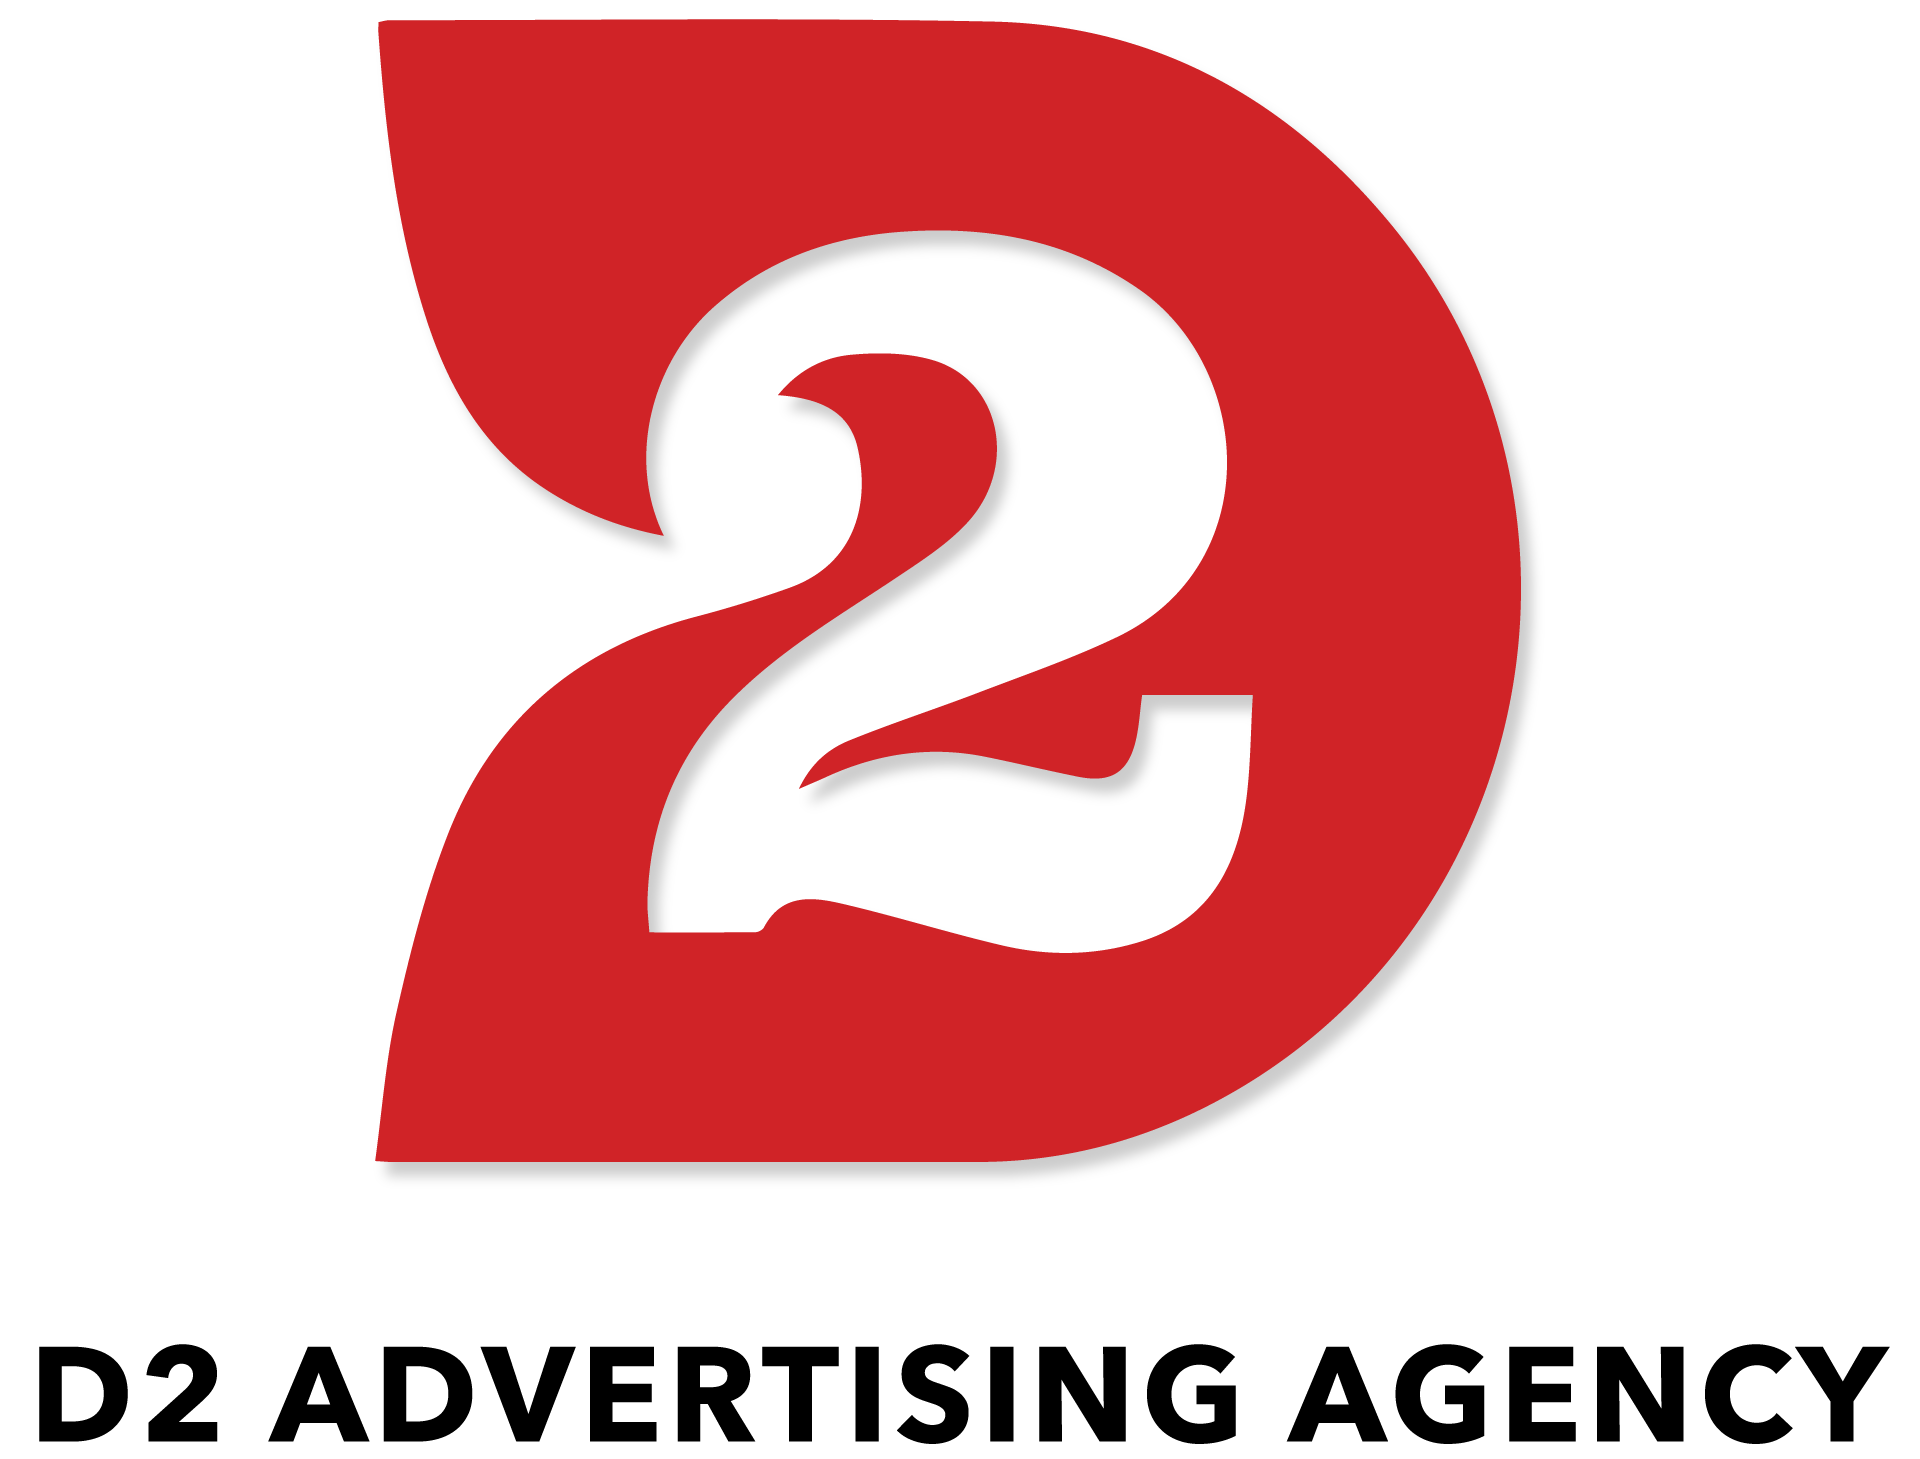 D2-NEW-LOGO-red-transparent-background-1.png